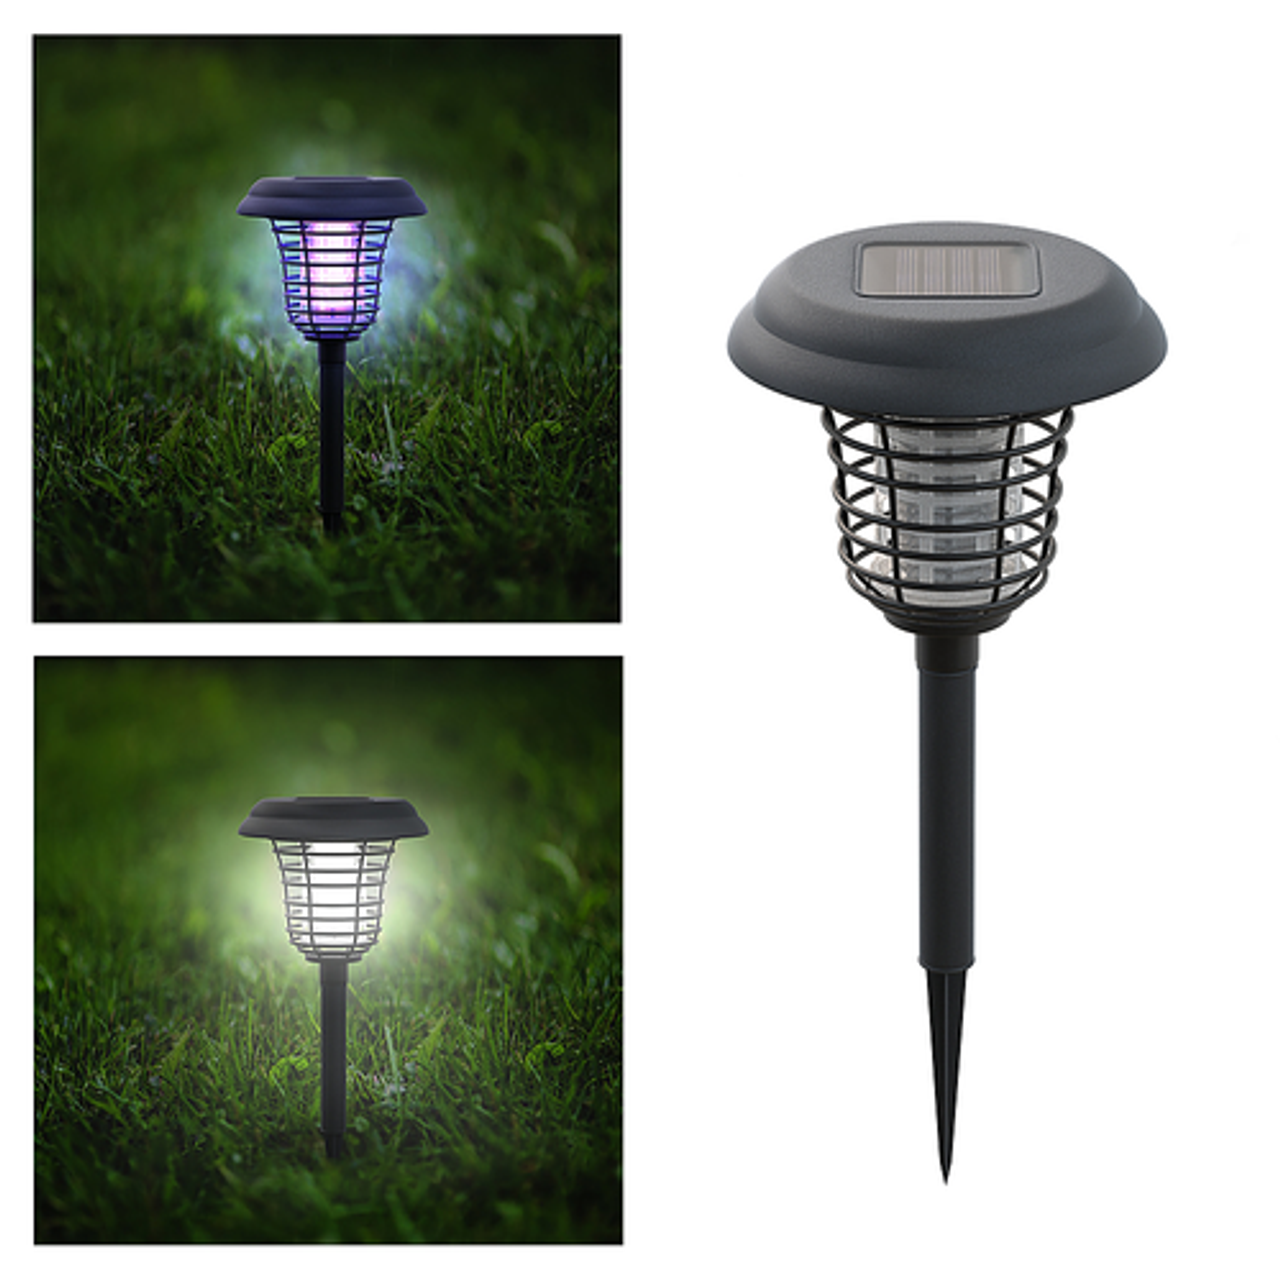 Nature Spring - Solar Light, Mosquito and Insect Bug Zapper - LED/UV Radiation Outdoor Stake Landscape Fixture for Gardens and Patios - Black